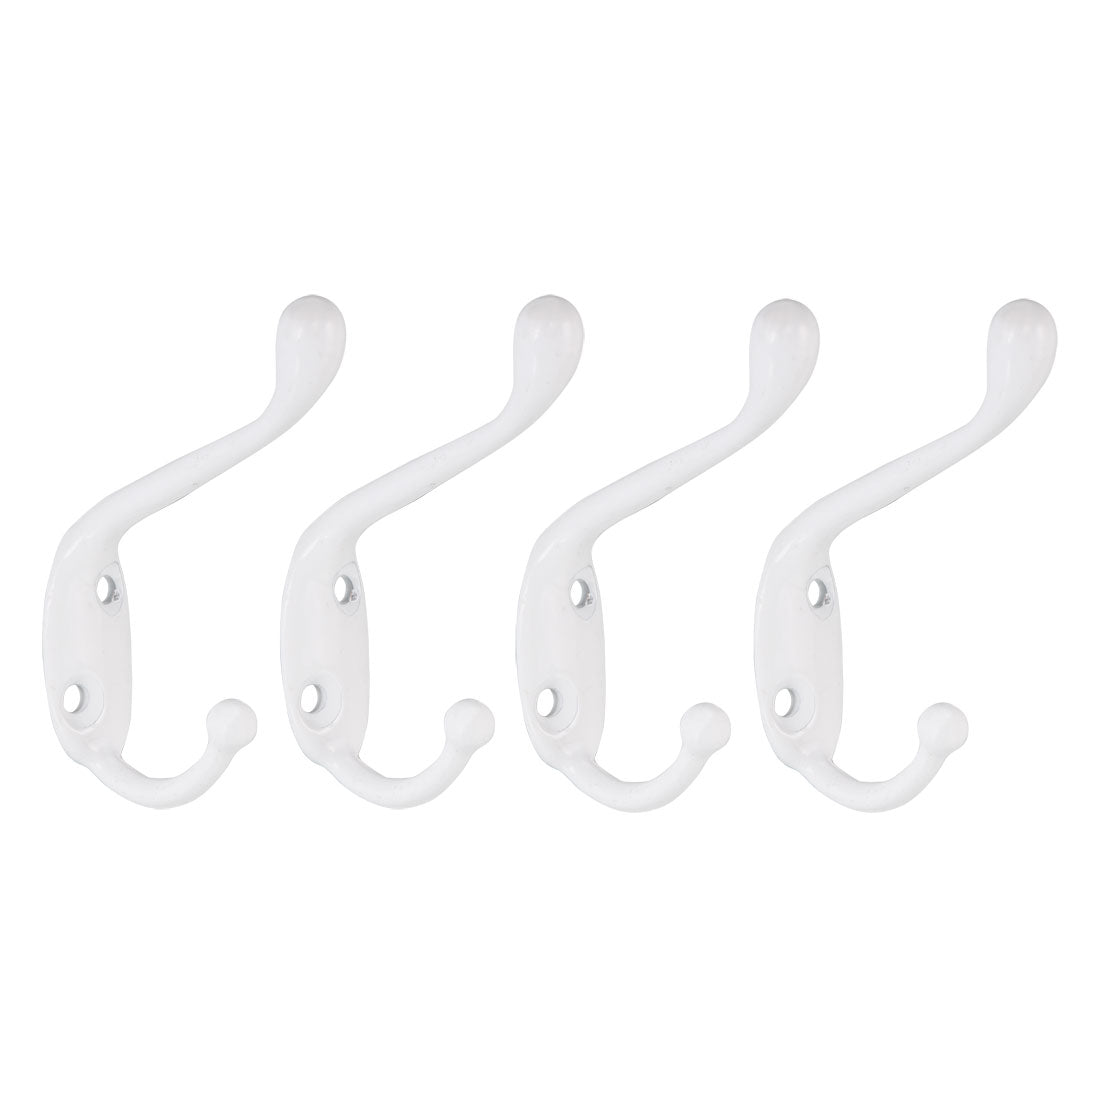 uxcell Uxcell Dual Prong Coat Hooks Wall Mounted Retro Double Hooks Utility White Hook for Coat Scarf Bag Towel Key Cap Cup Hat 80mm x 17mm x 55mm 4pcs